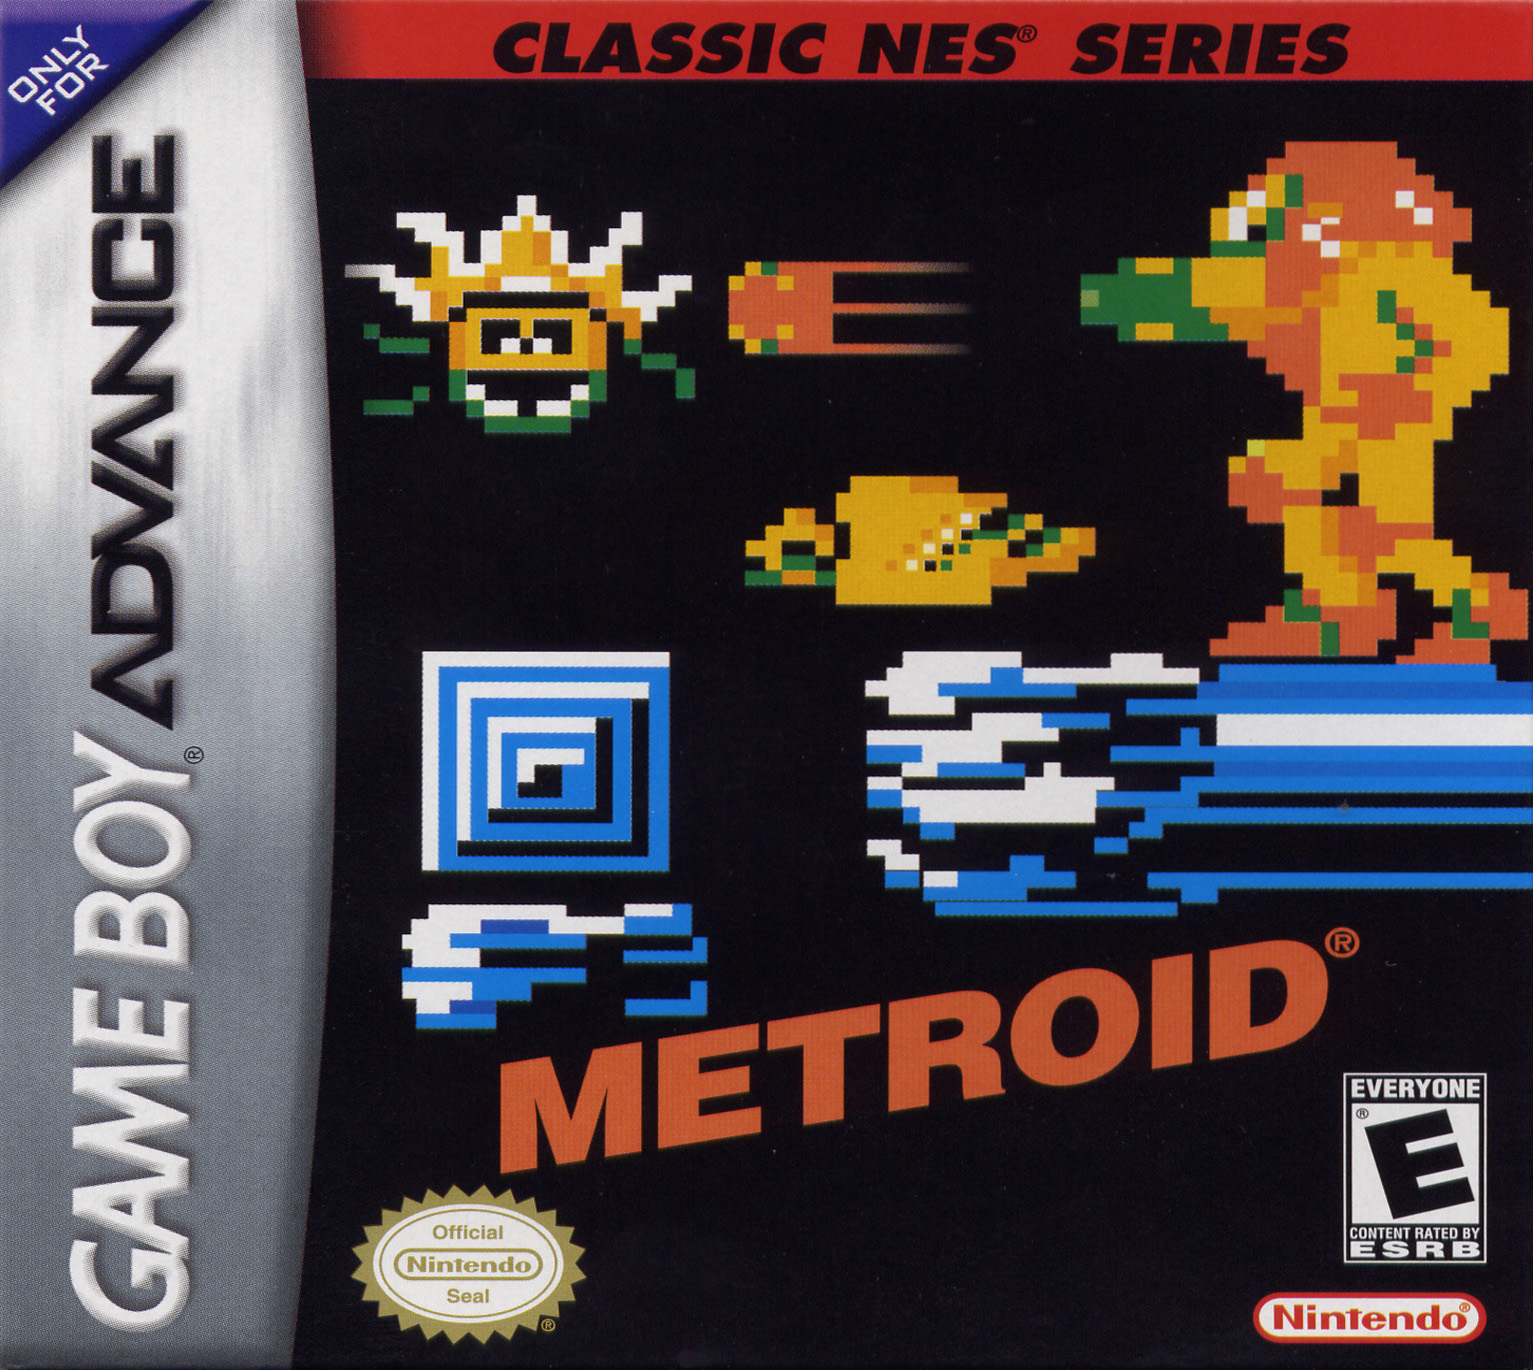 View, Download, Rate, and Comment on this Classic NES Series: Metroid Video...